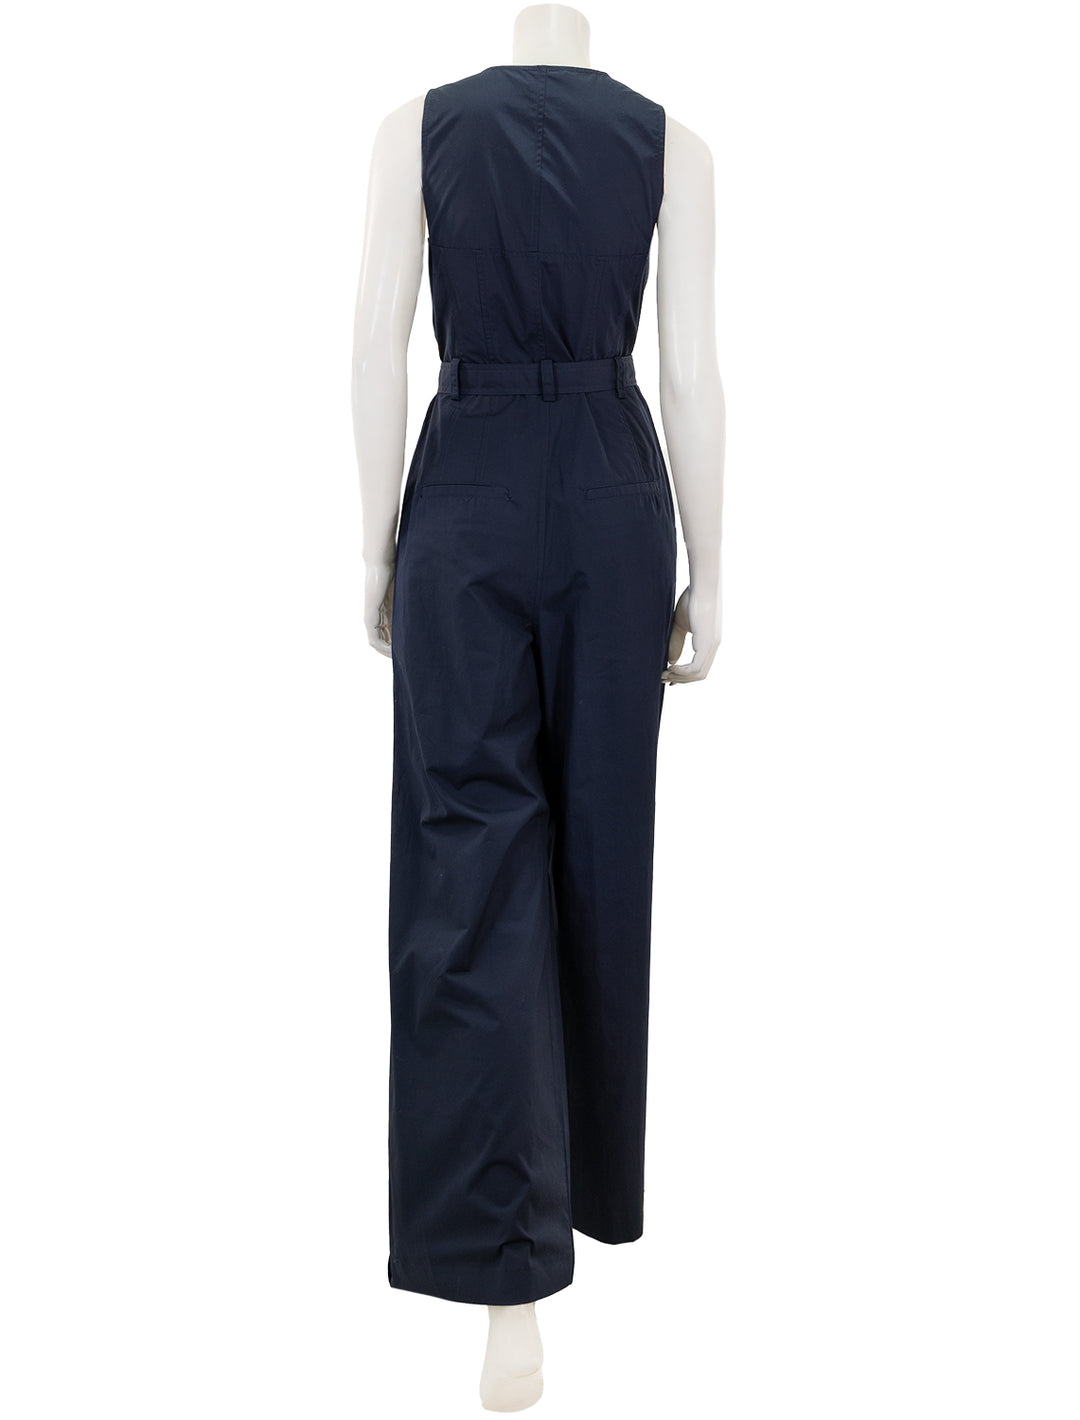 Back view of Ulla Johnson's marin jumpsuit in midnight.